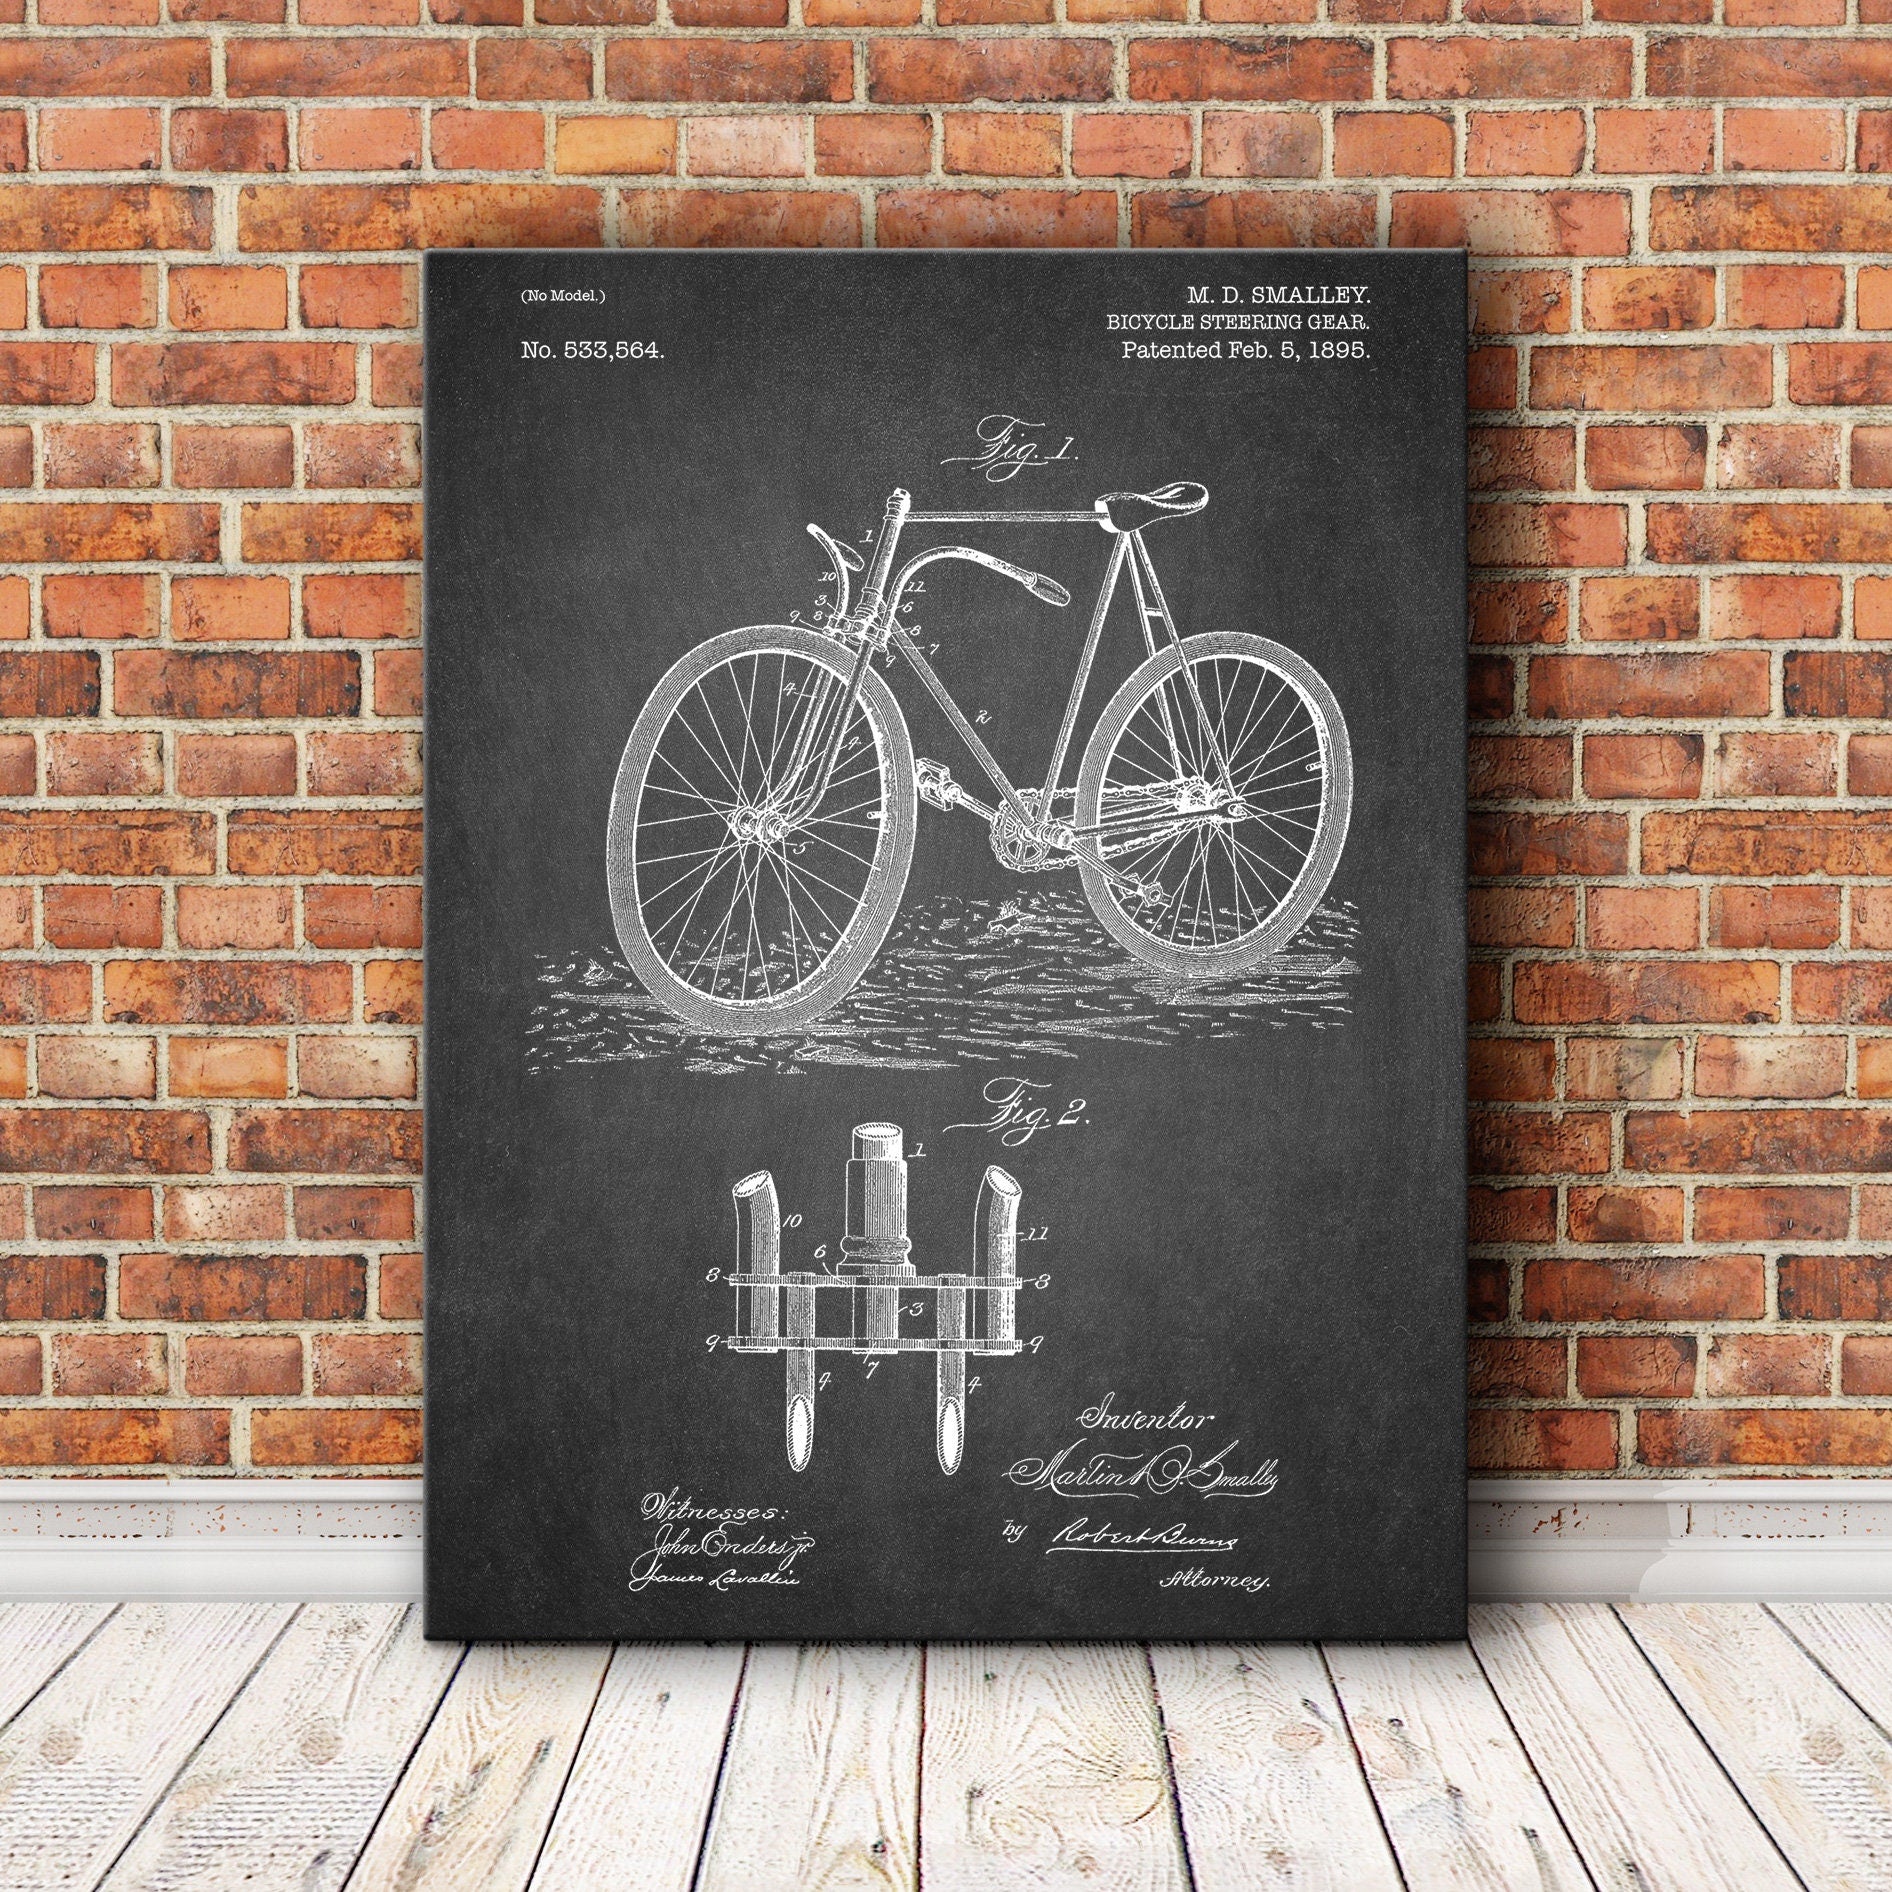 Sports Patent print, Bicycle Steering Gear for Sports Patent print, Patent print, Patent print design, Vintage patent print, Sports Art